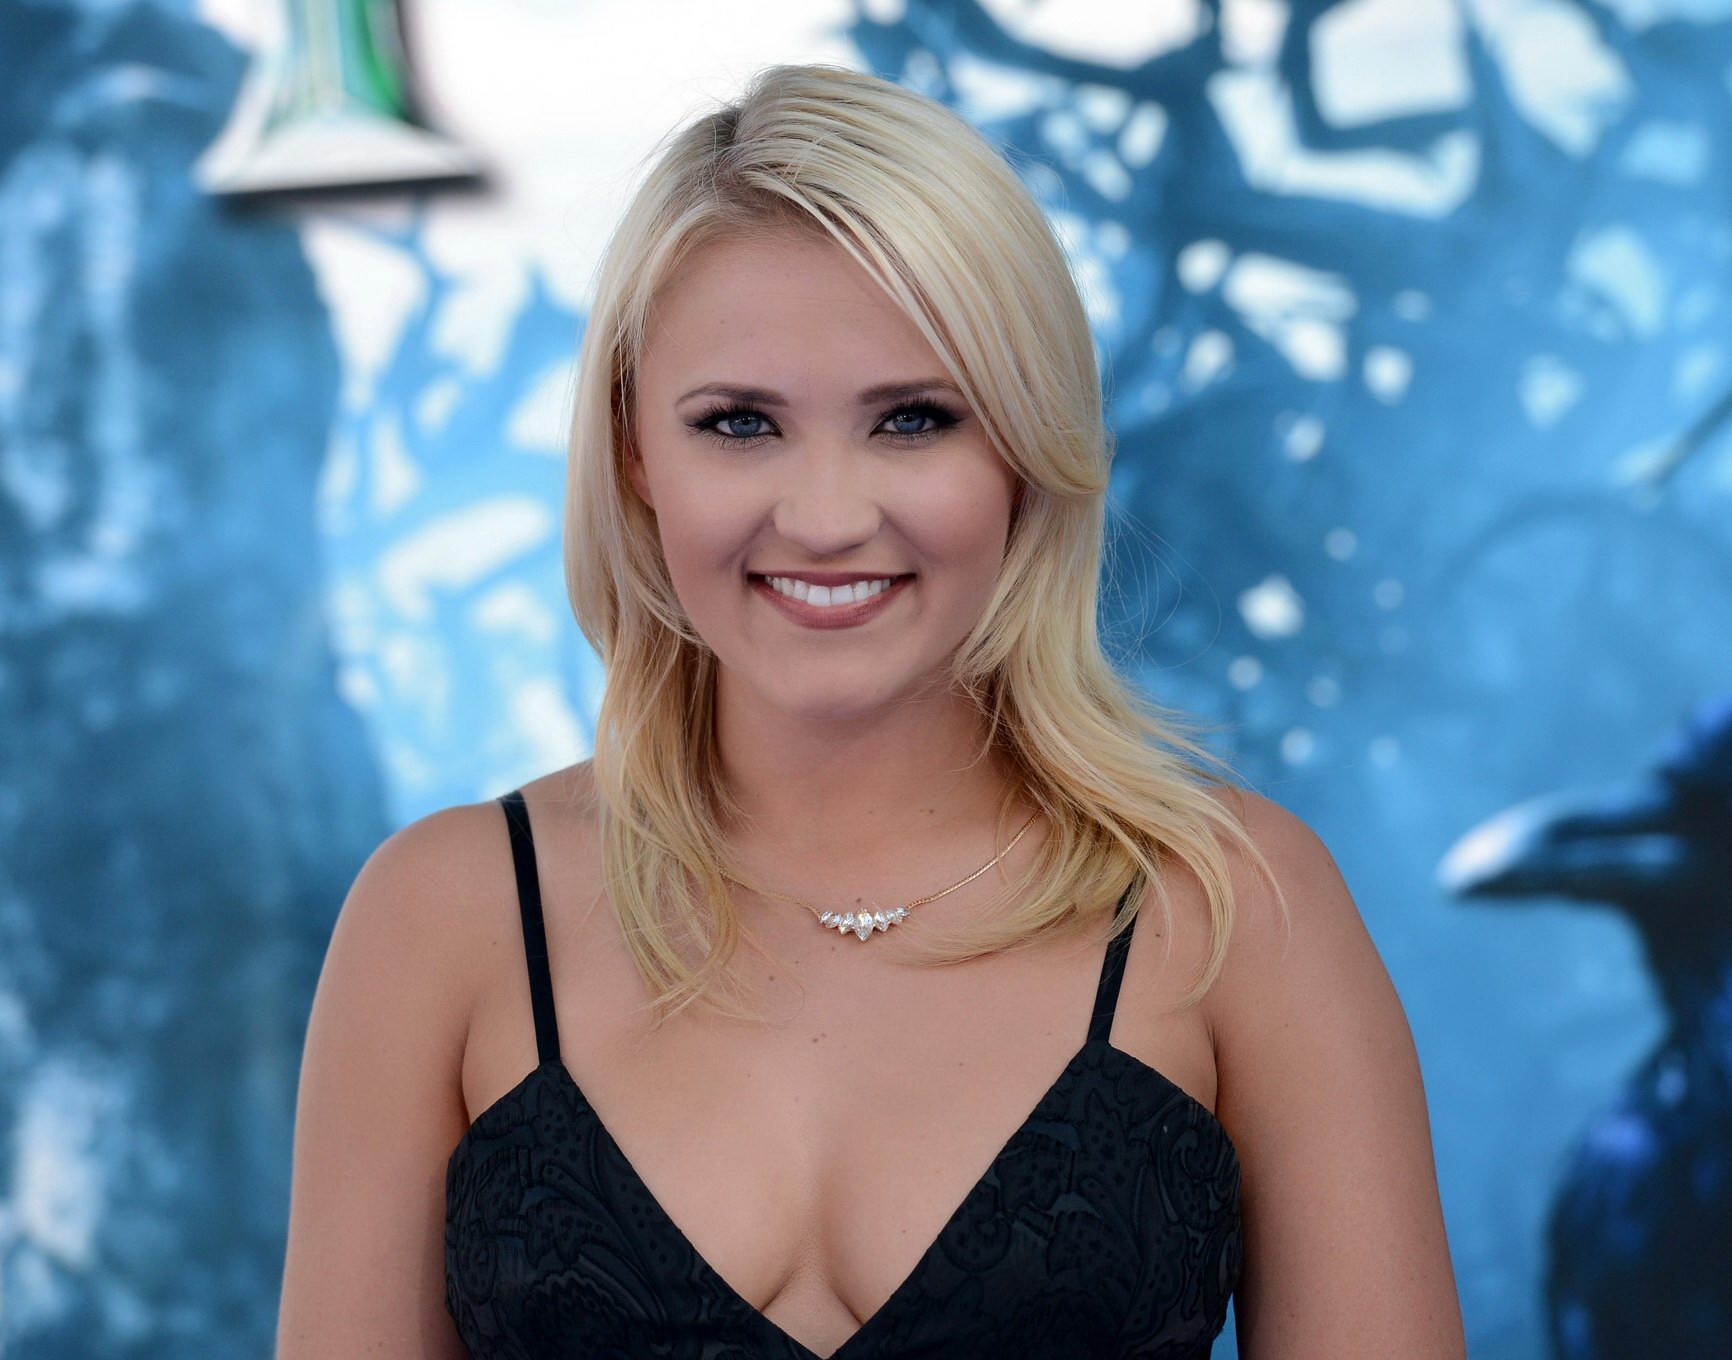 Busty Emily Osment wearing a low cut black dress at the Maleficent premiere in H #75195335